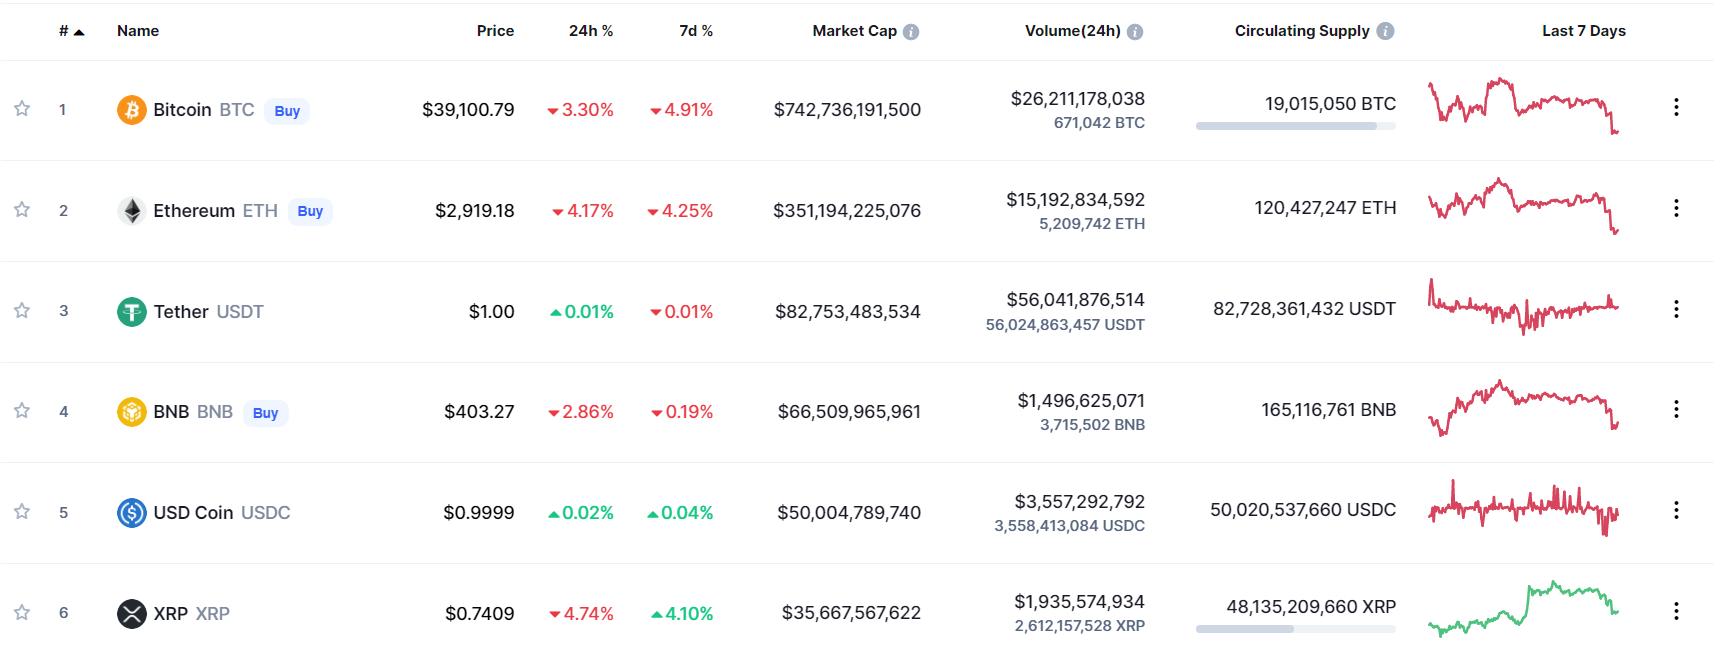 Ranking of the largest coins by market capitalization as of April 18, 2022. Source: CoinMarketCap